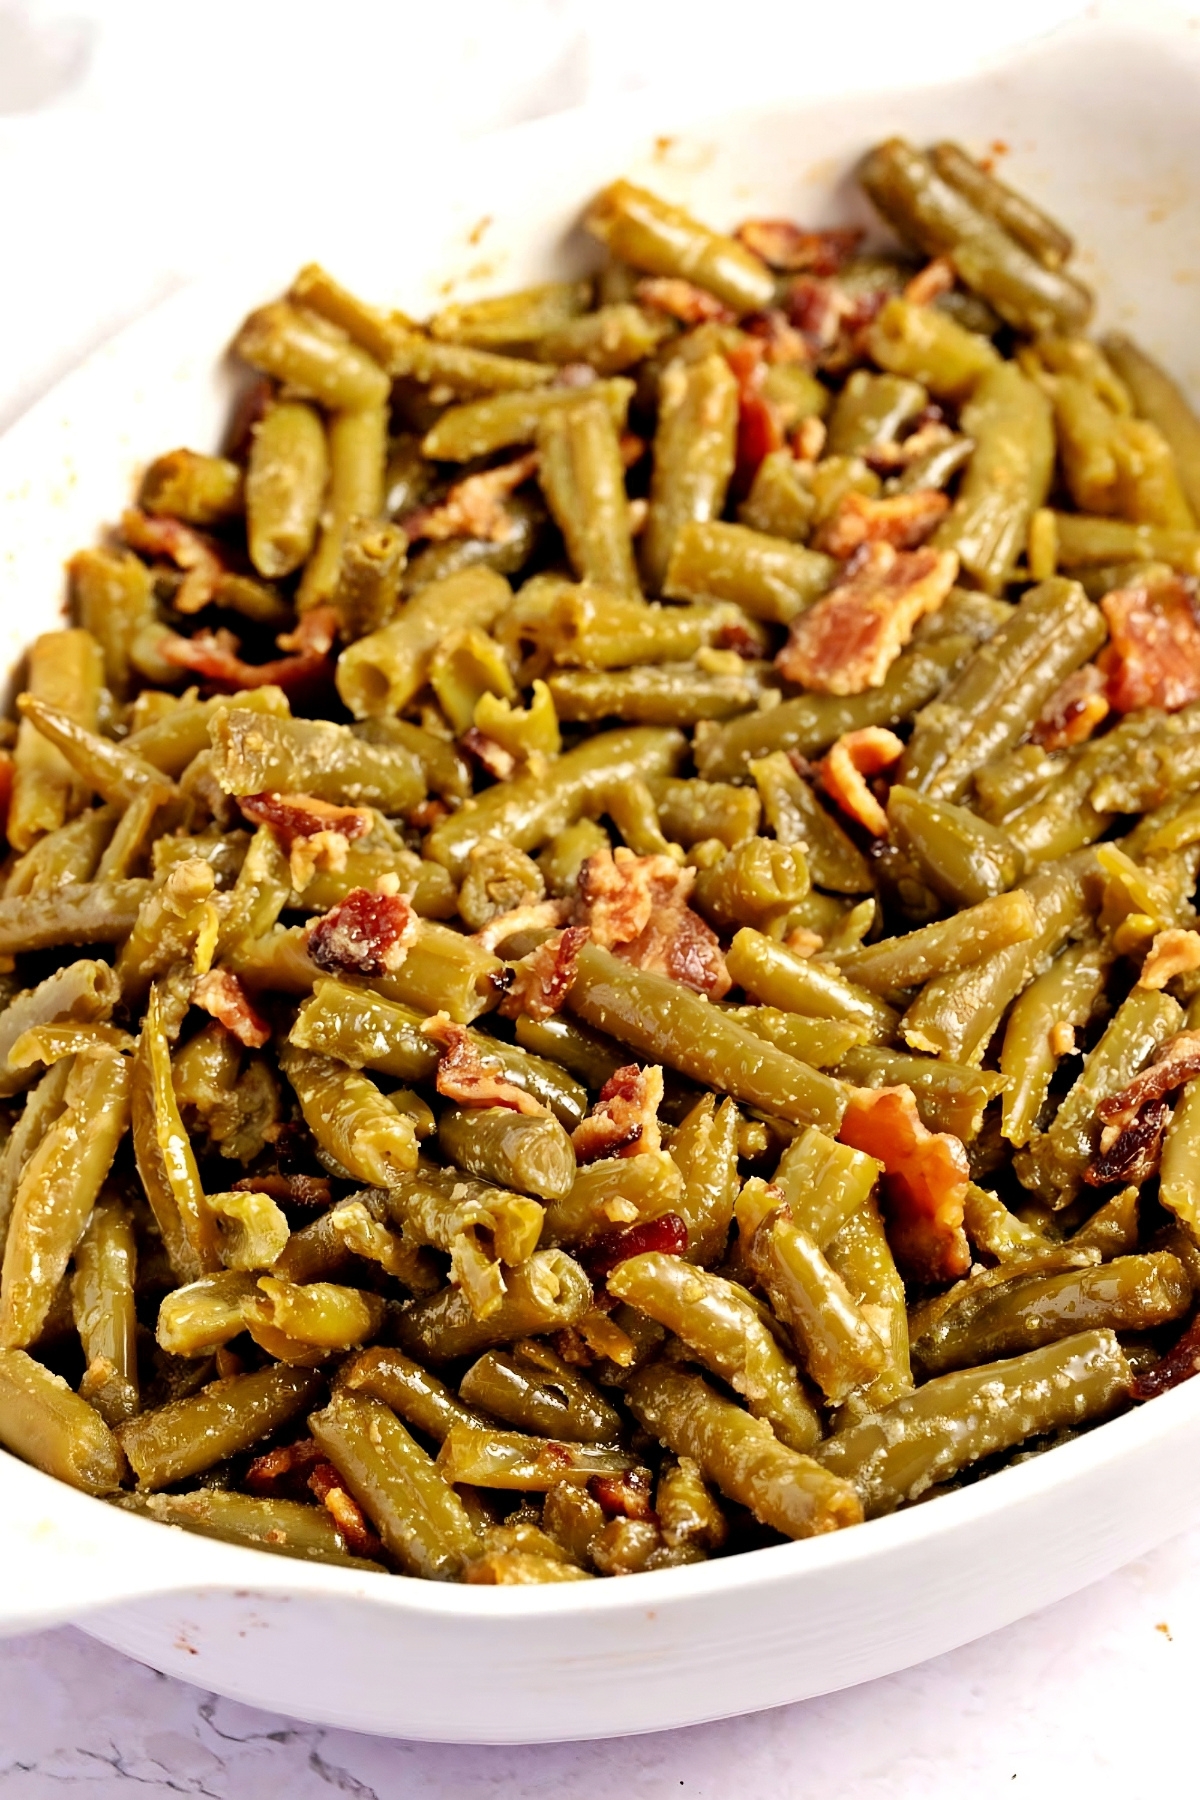 Crack Green Beans with Butter, Seasonings, and Crispy Bacon in a Baking Dish